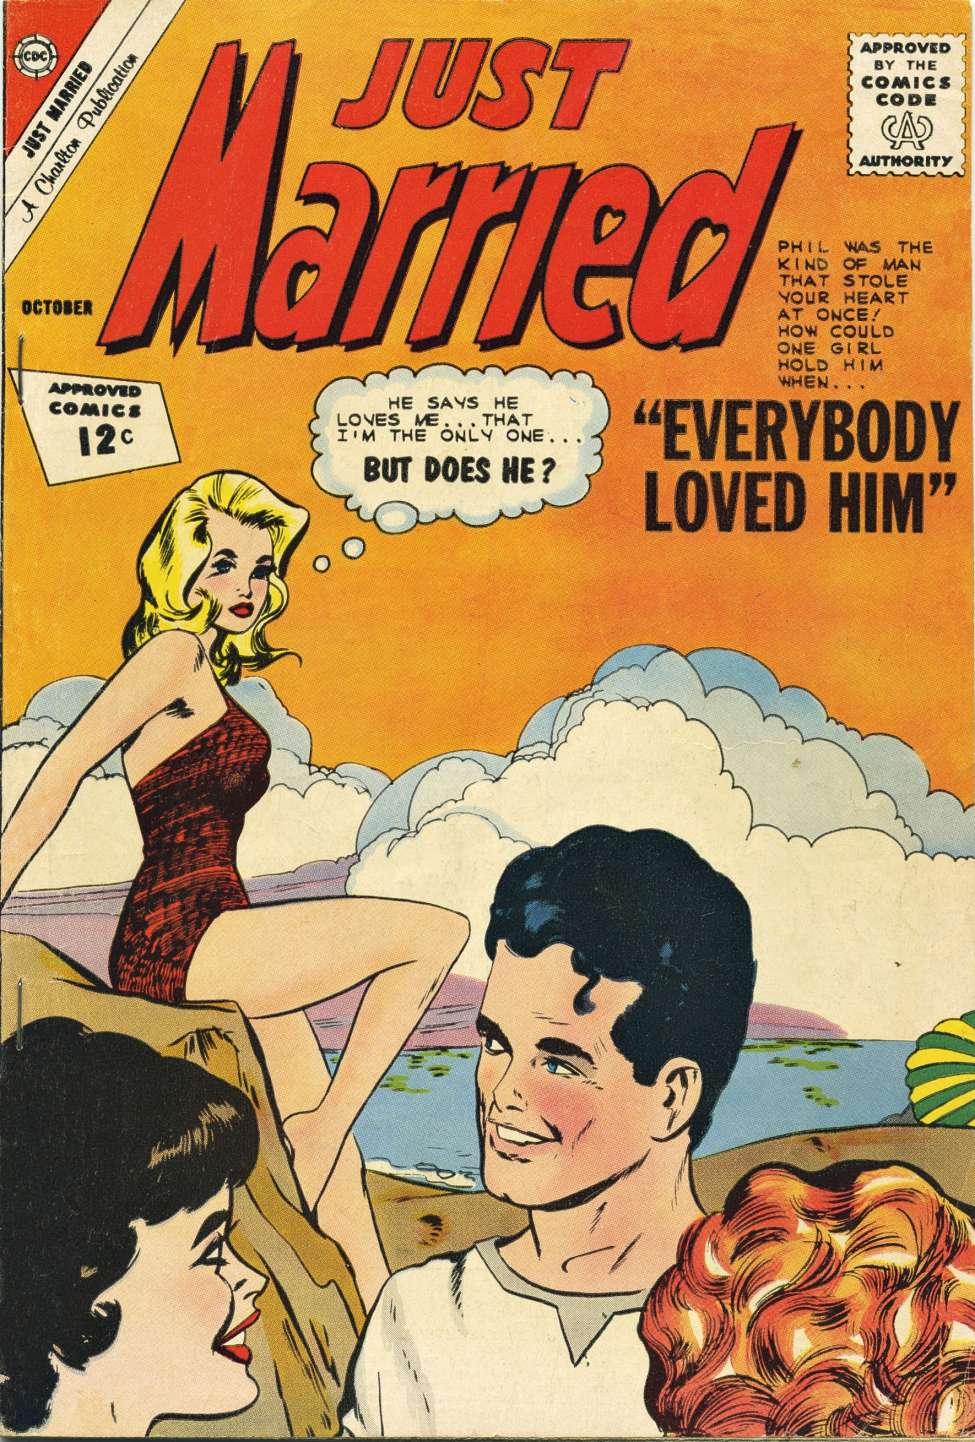 Comic Book Cover For Just Married 27